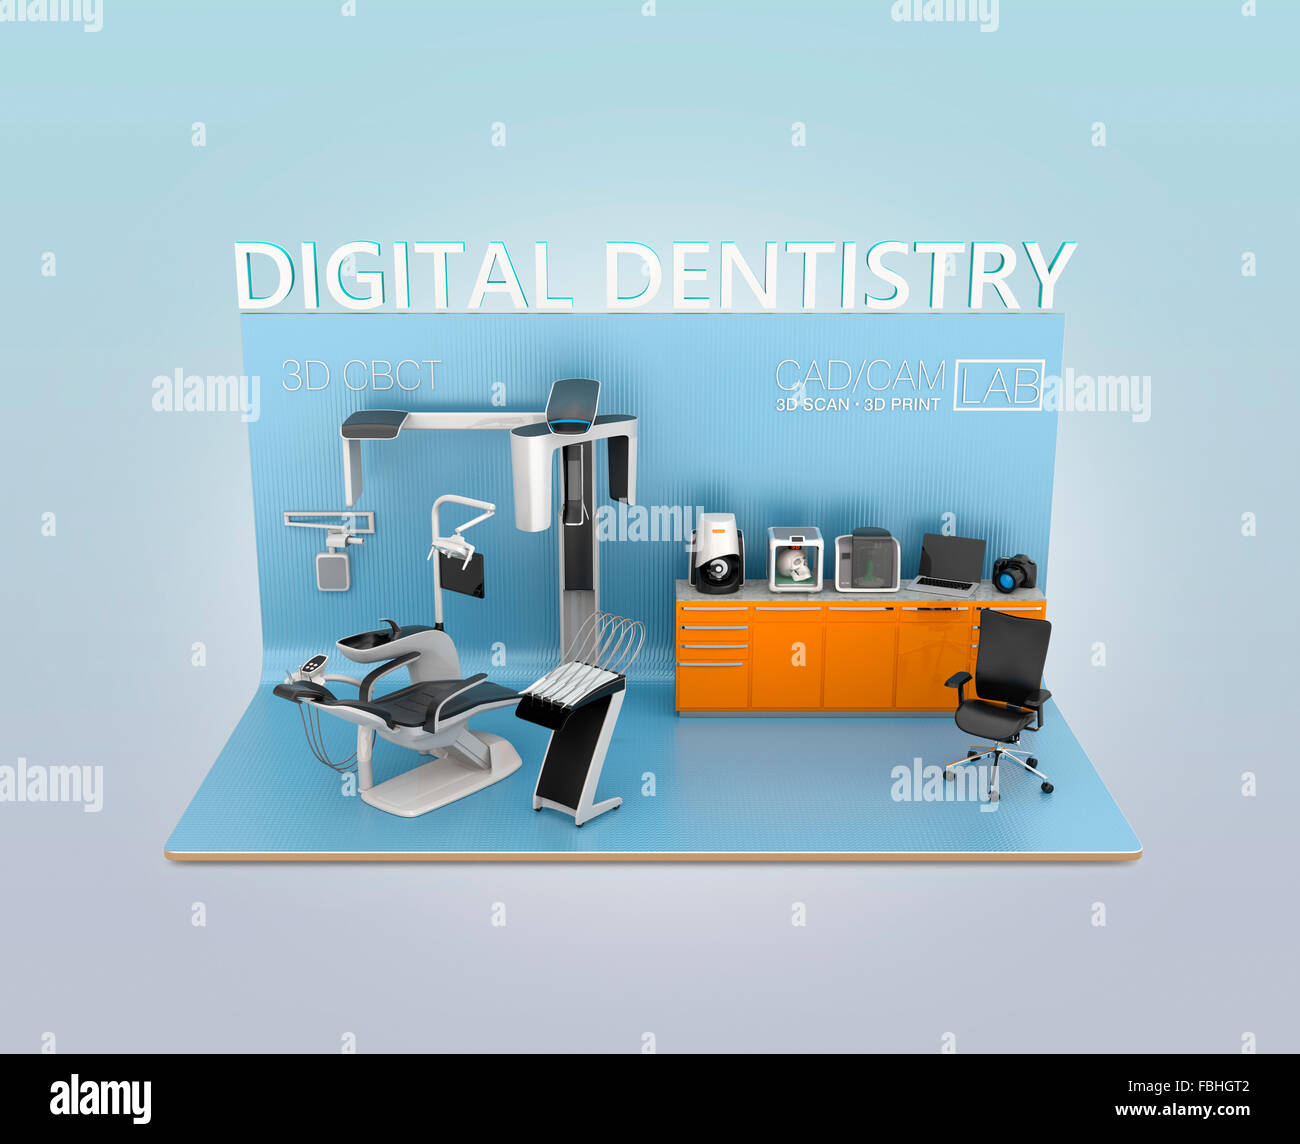 Digital dentistry concept. Scan patient facial data by dental CT, send to chair side or lab for 3D print. Stock Photo